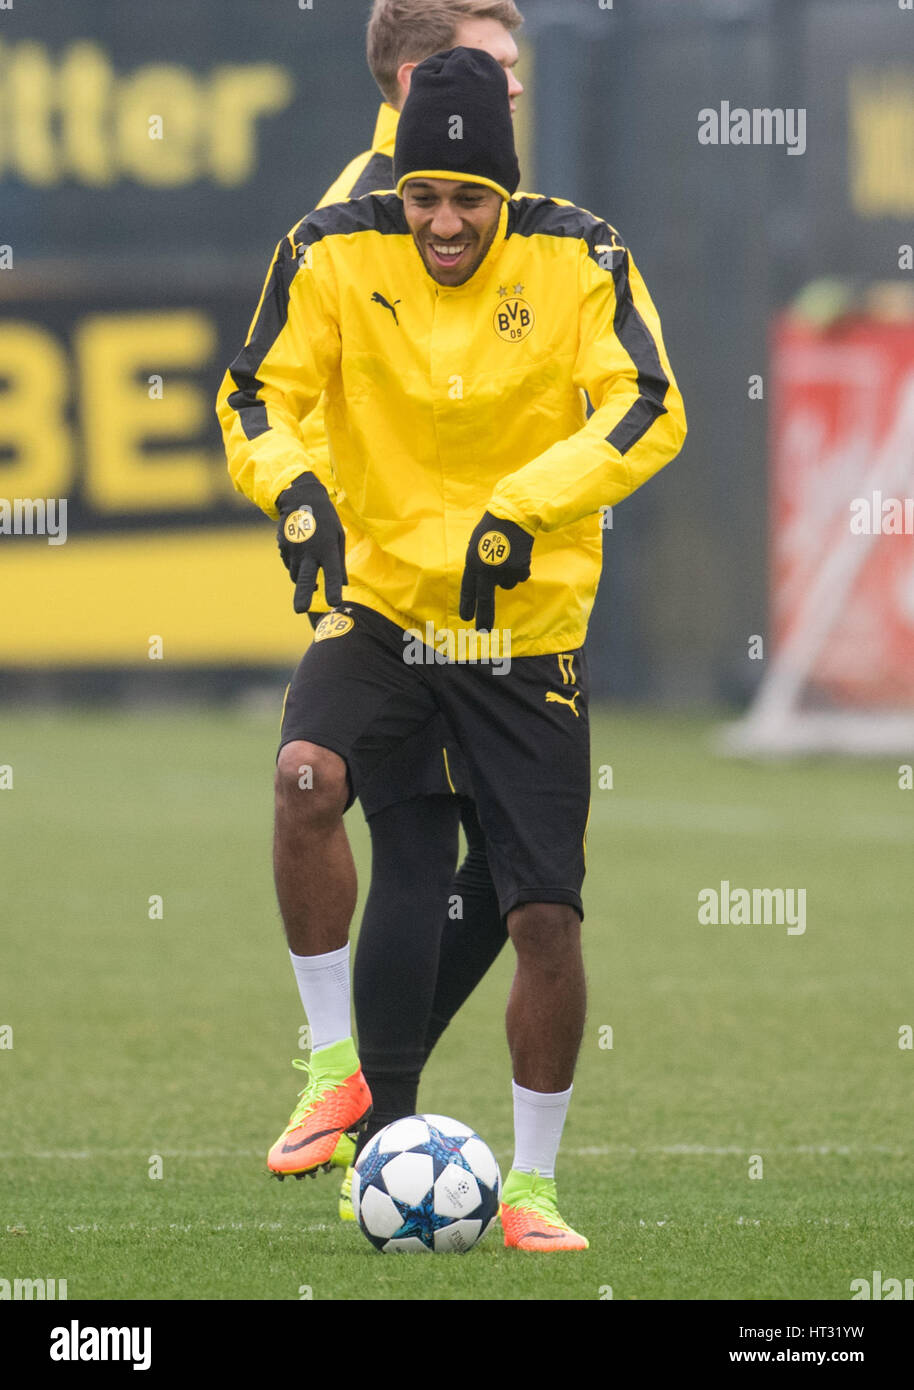 Dortmund, Germany. 7th Mar, 2017. Borussia Dortmund's Pierre-Emerick Aubameyang messes about on the training grounds in Dortmund, Germany, 7 March 2017. BVB will meet Benfica Lissabon in the second round second legs of the Champions League (8.03.). Photo: Bernd Thissen/dpa/Alamy Live News Stock Photo